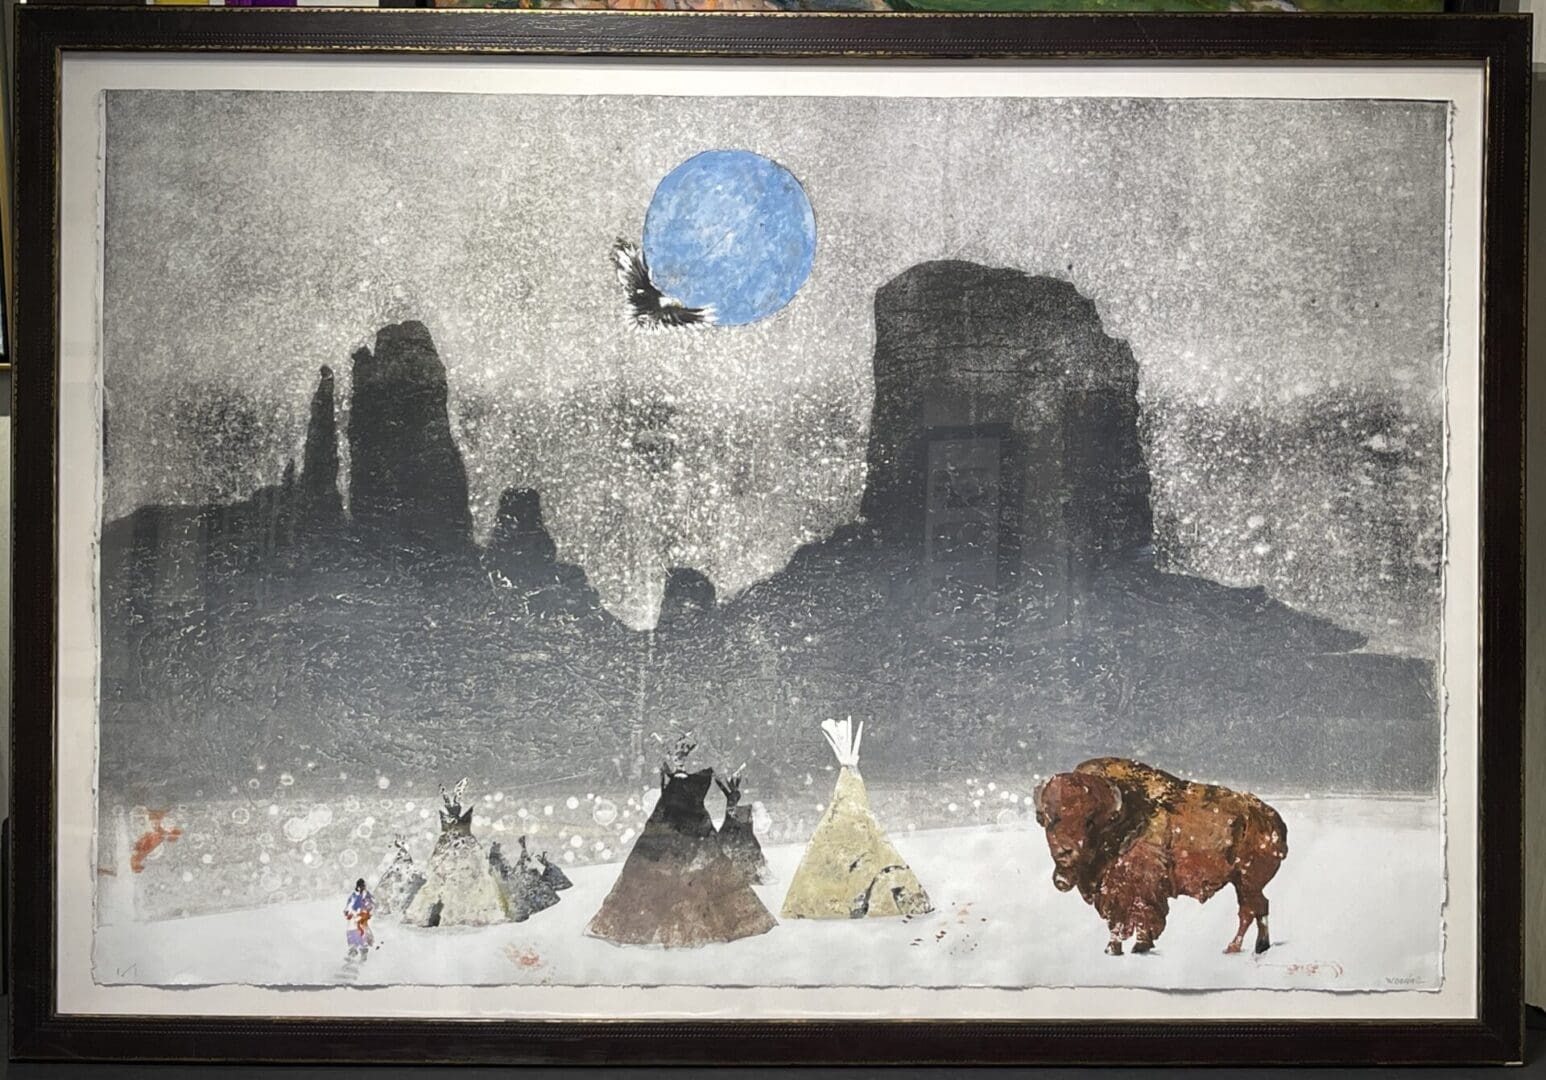 A painting of "Western Riders Full Moon" with a buffalo and teepees.